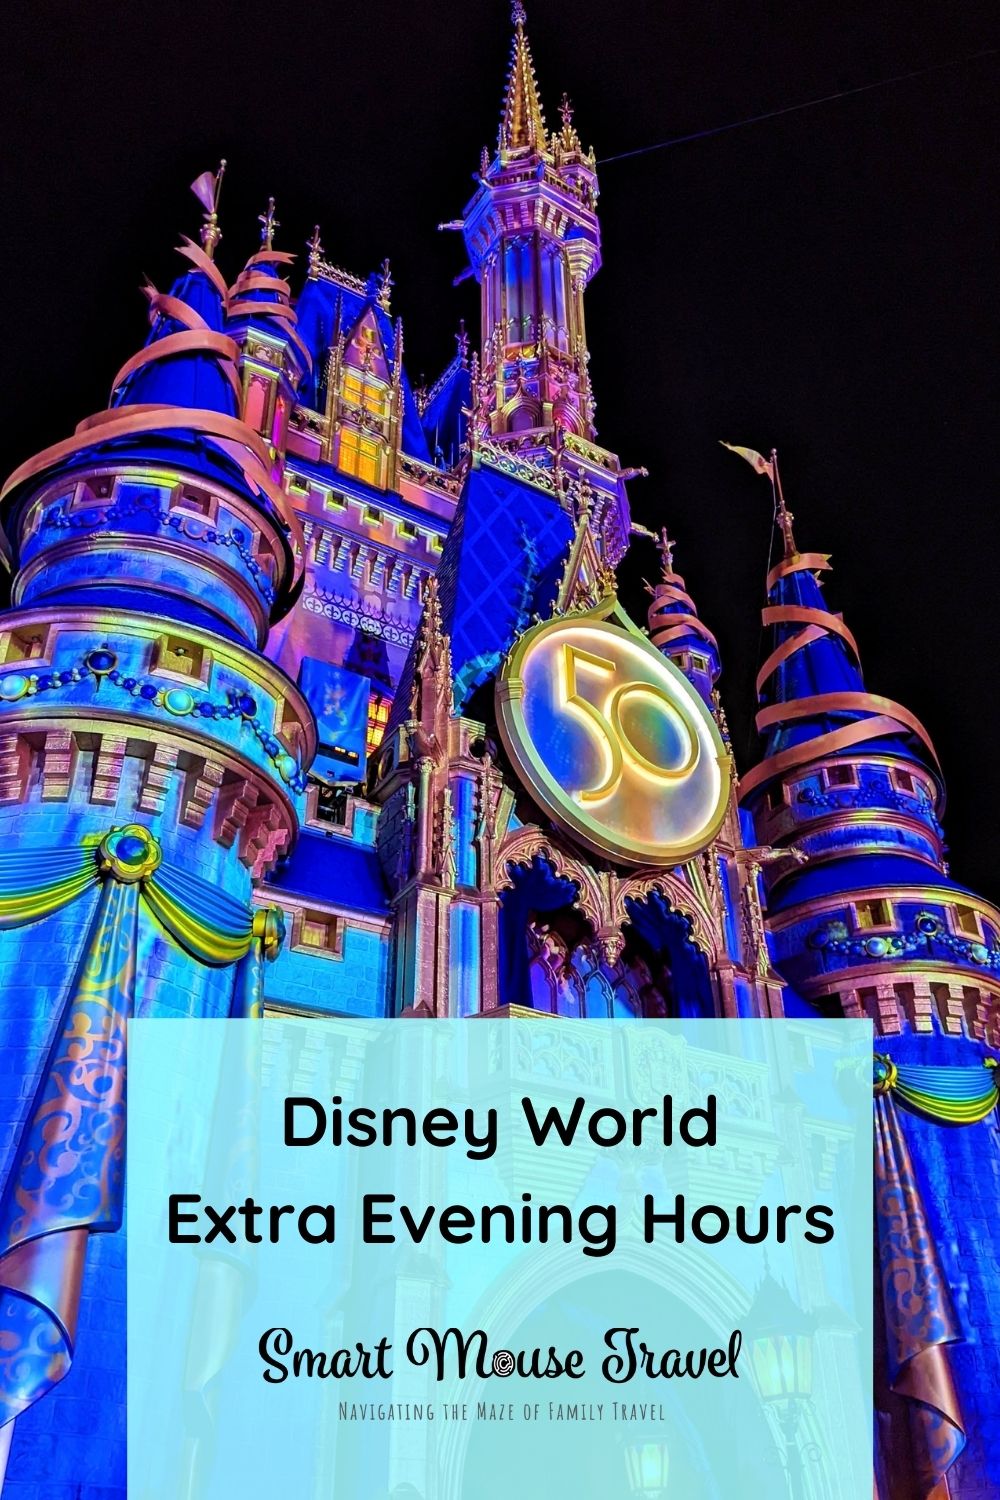 Disney World Extended Evening Theme Park Hours Smart Mouse Travel